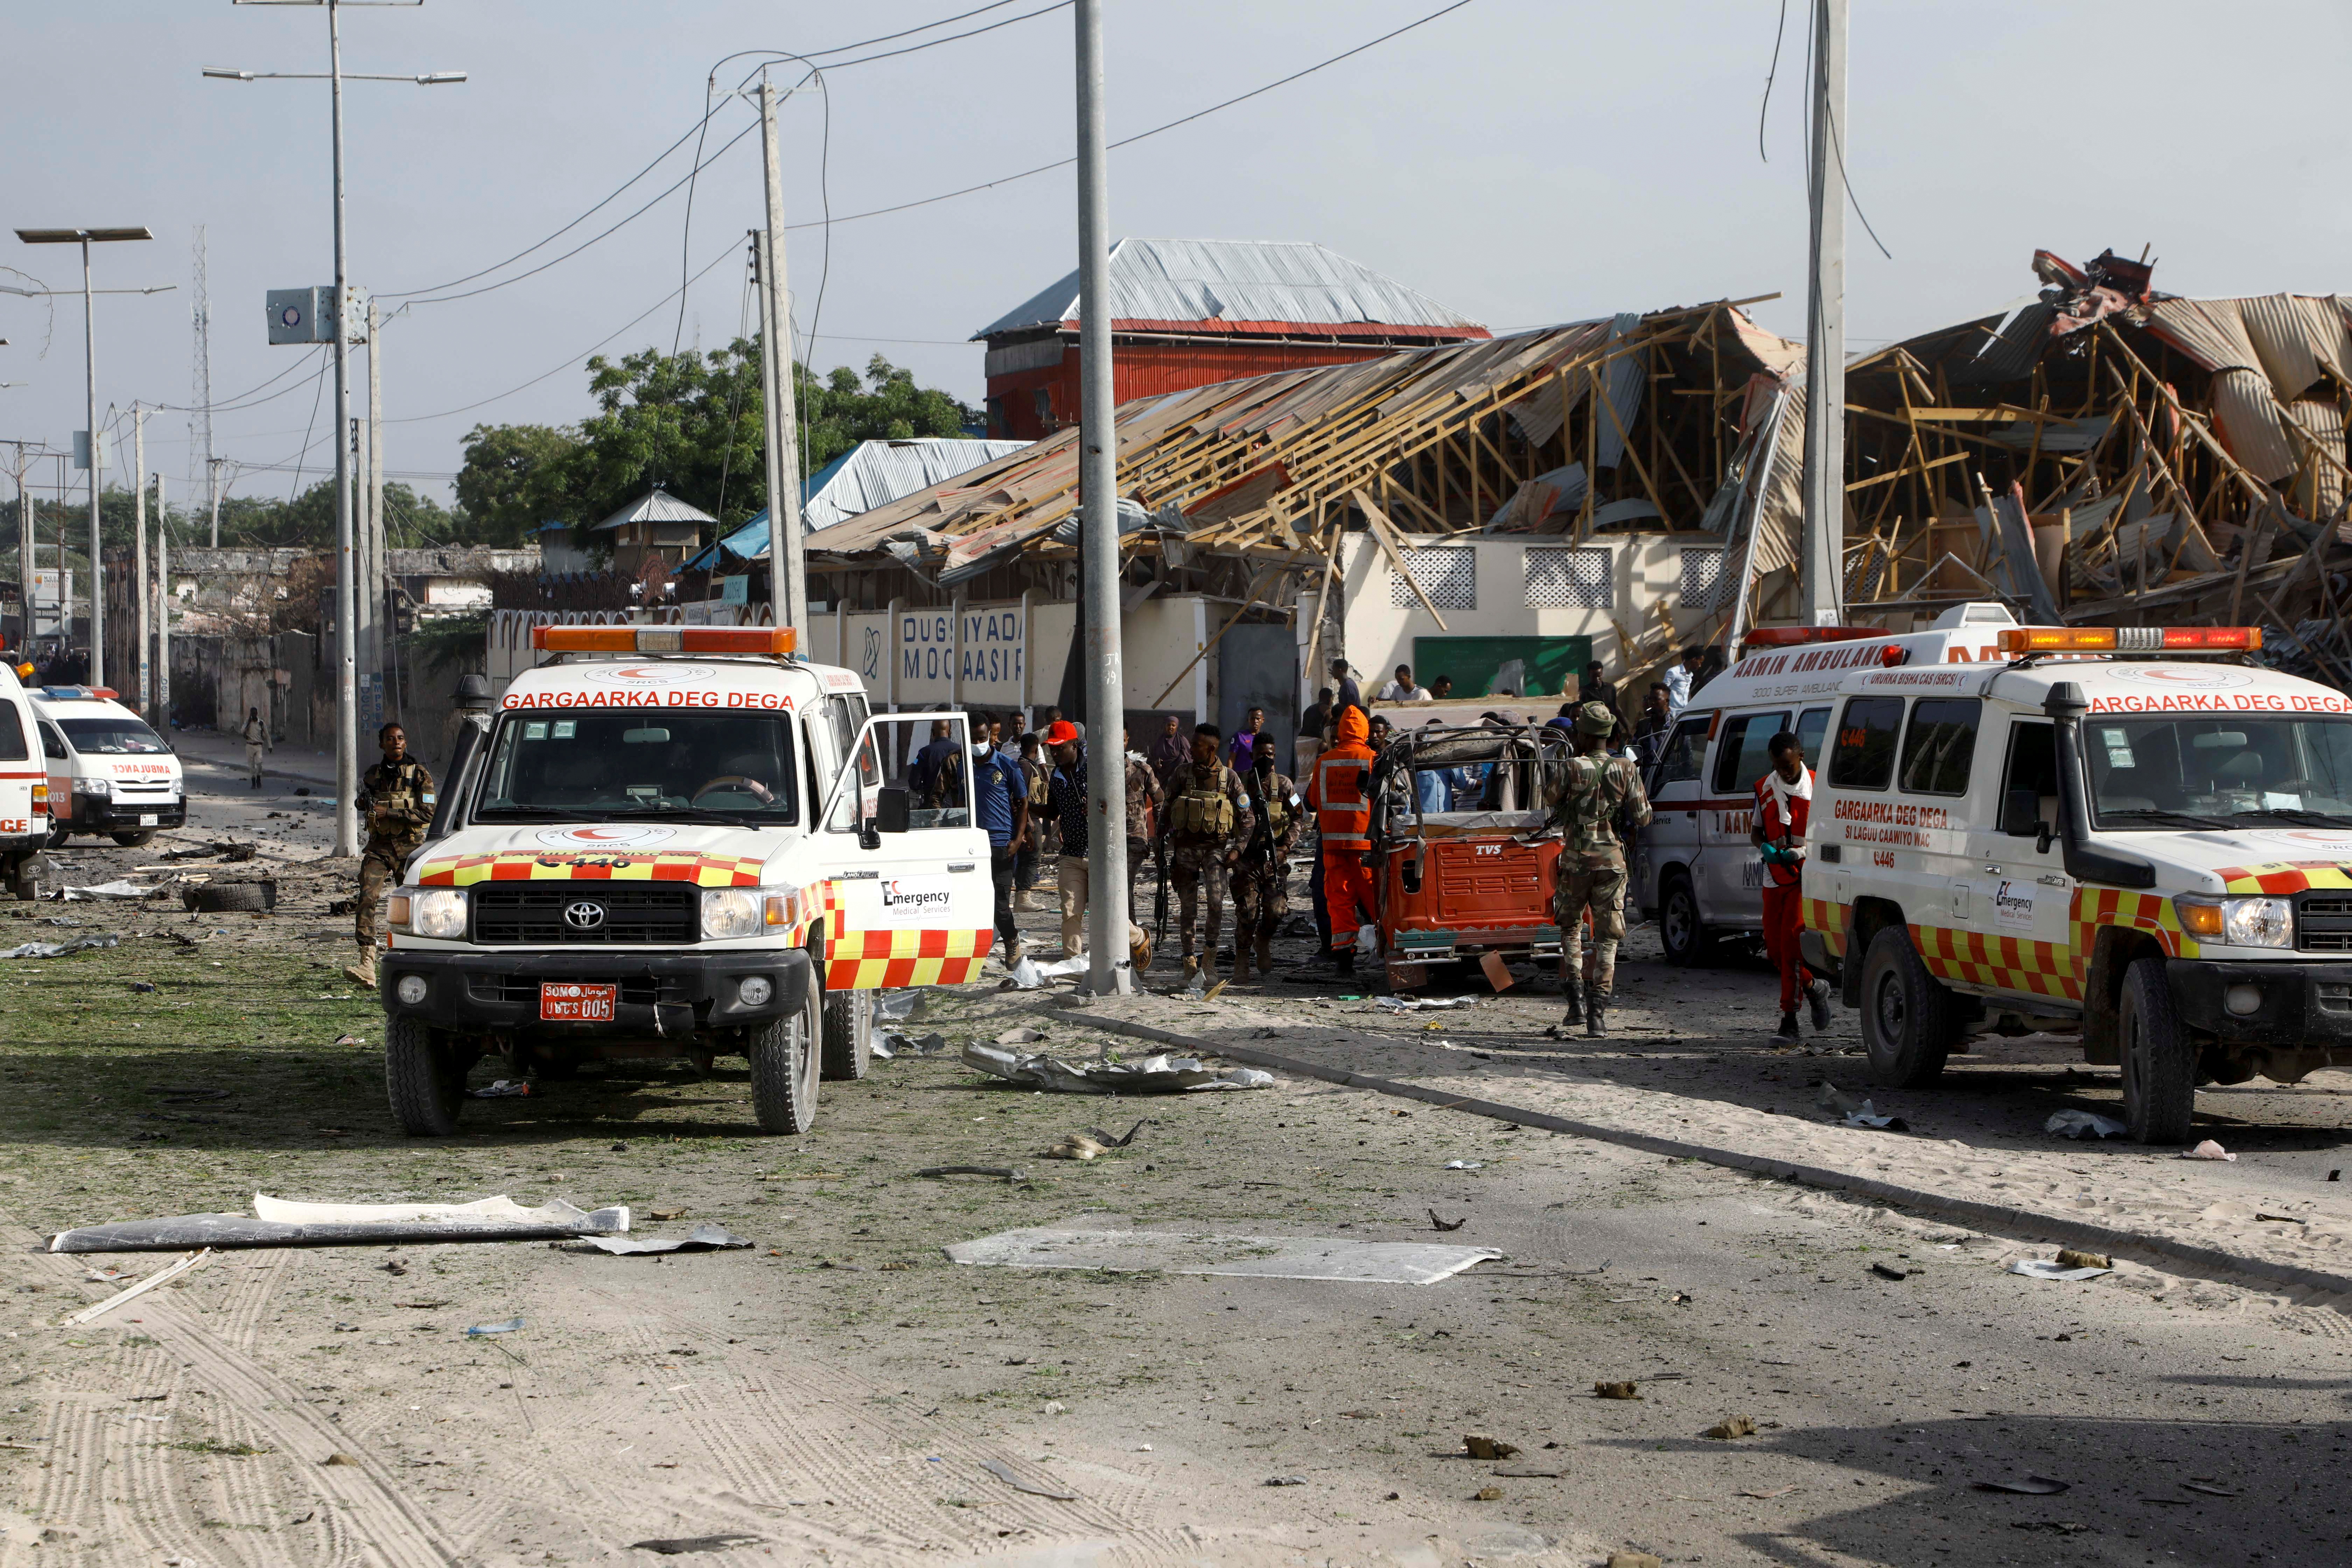 Somali police and paramedics are seen at the scene after a car exploded in a suicide attack near Mucassar primary and secondary school in Hodan district of Mogadishu